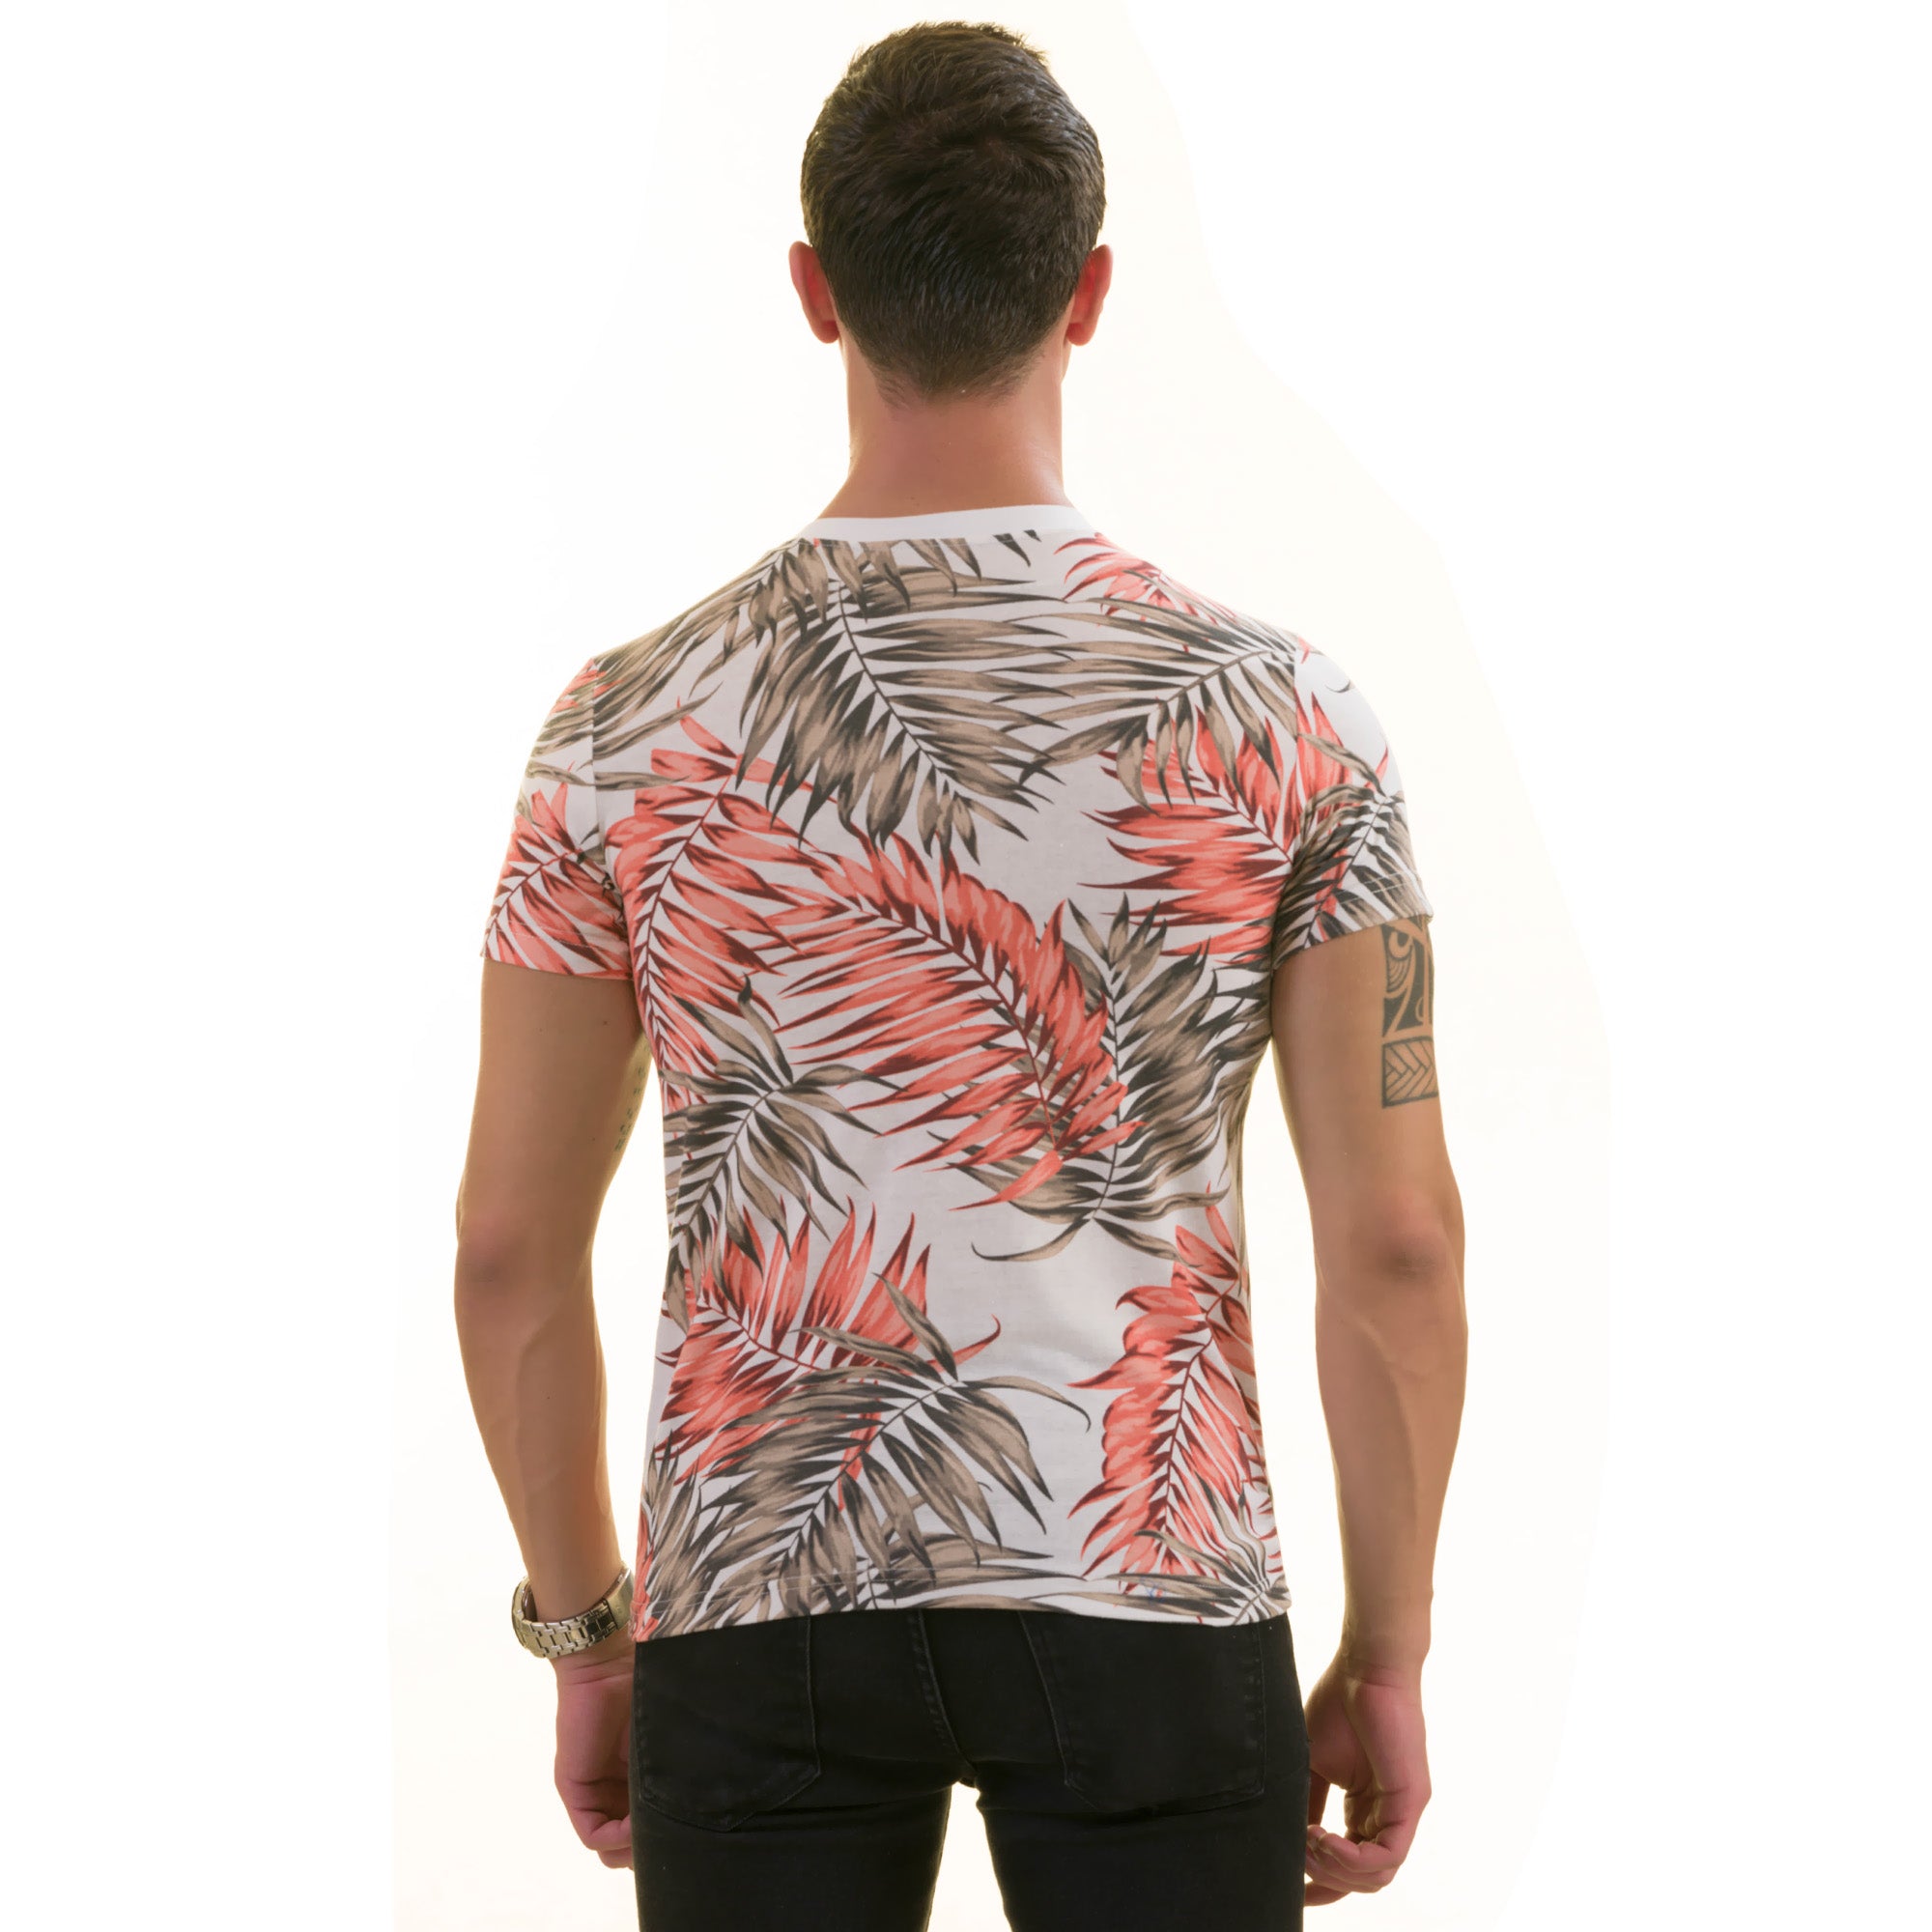 Peach and Brown Leaves European Made Premium Quality T-Shirt - Crew Neck Short Sleeve T-Shirts